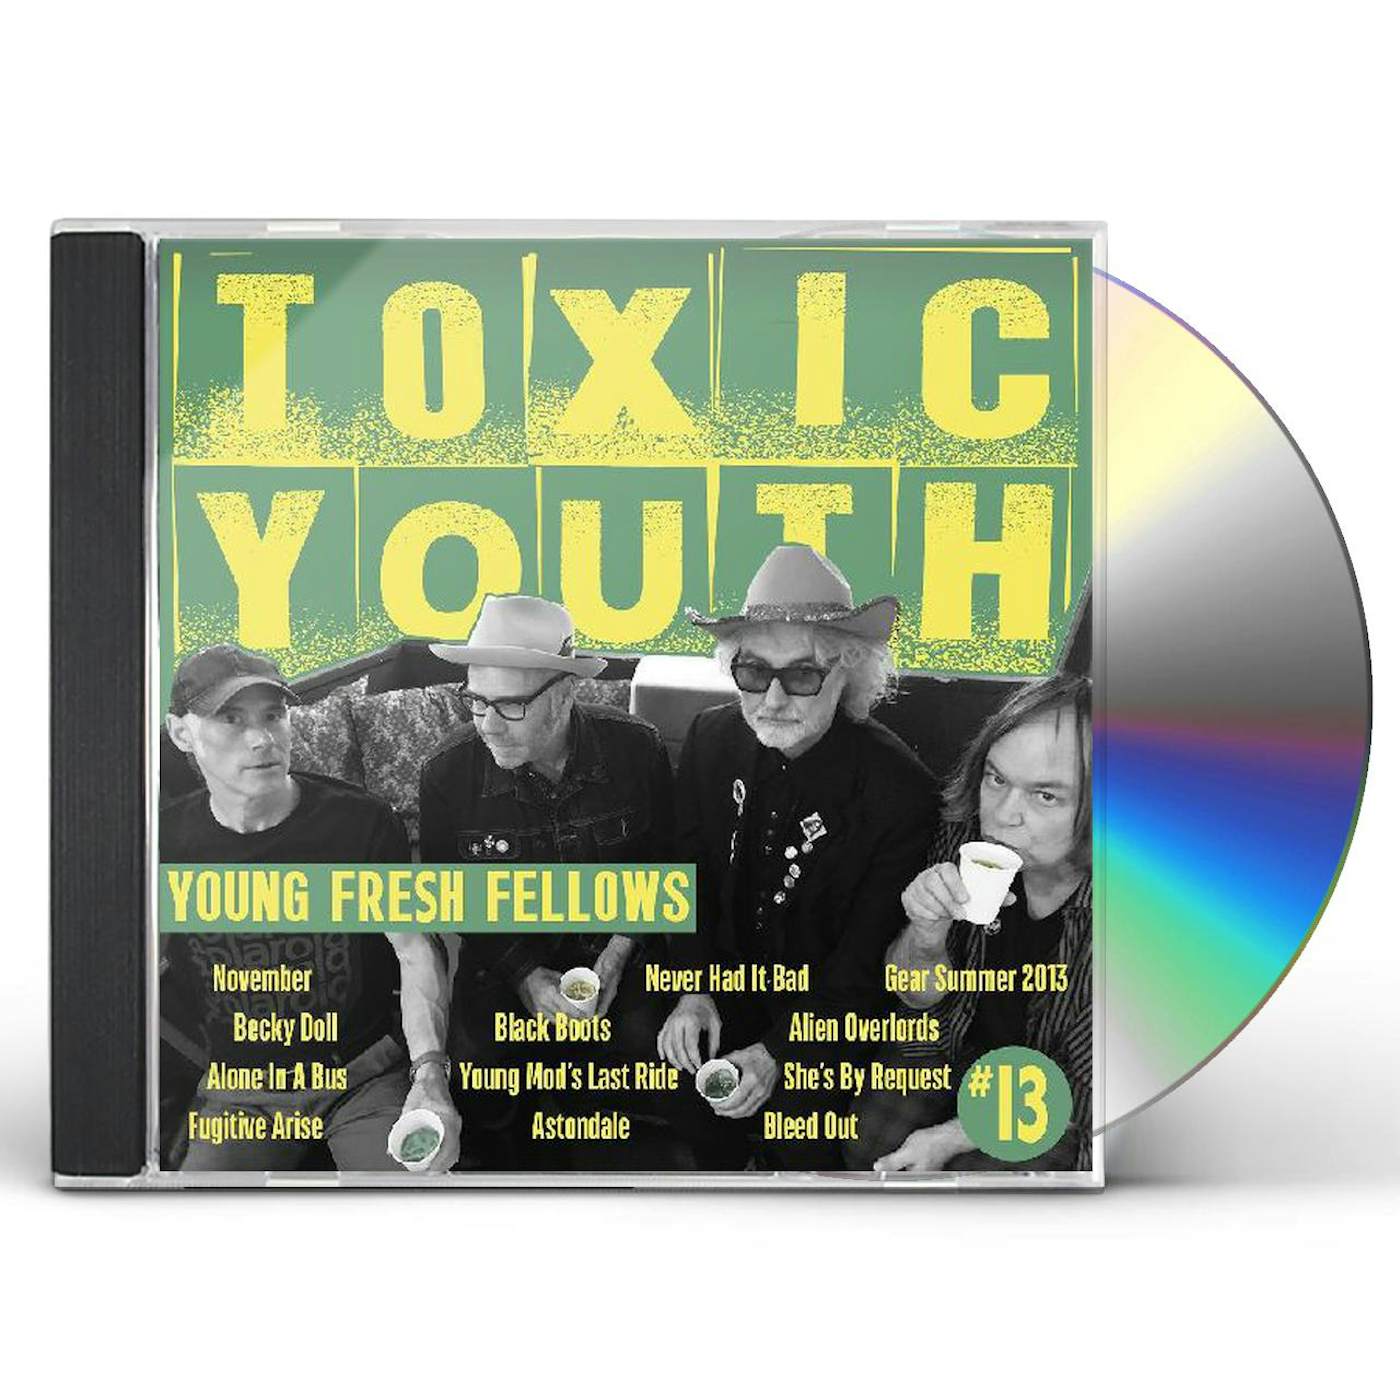 The Young Fresh Fellows Toxic Youth CD